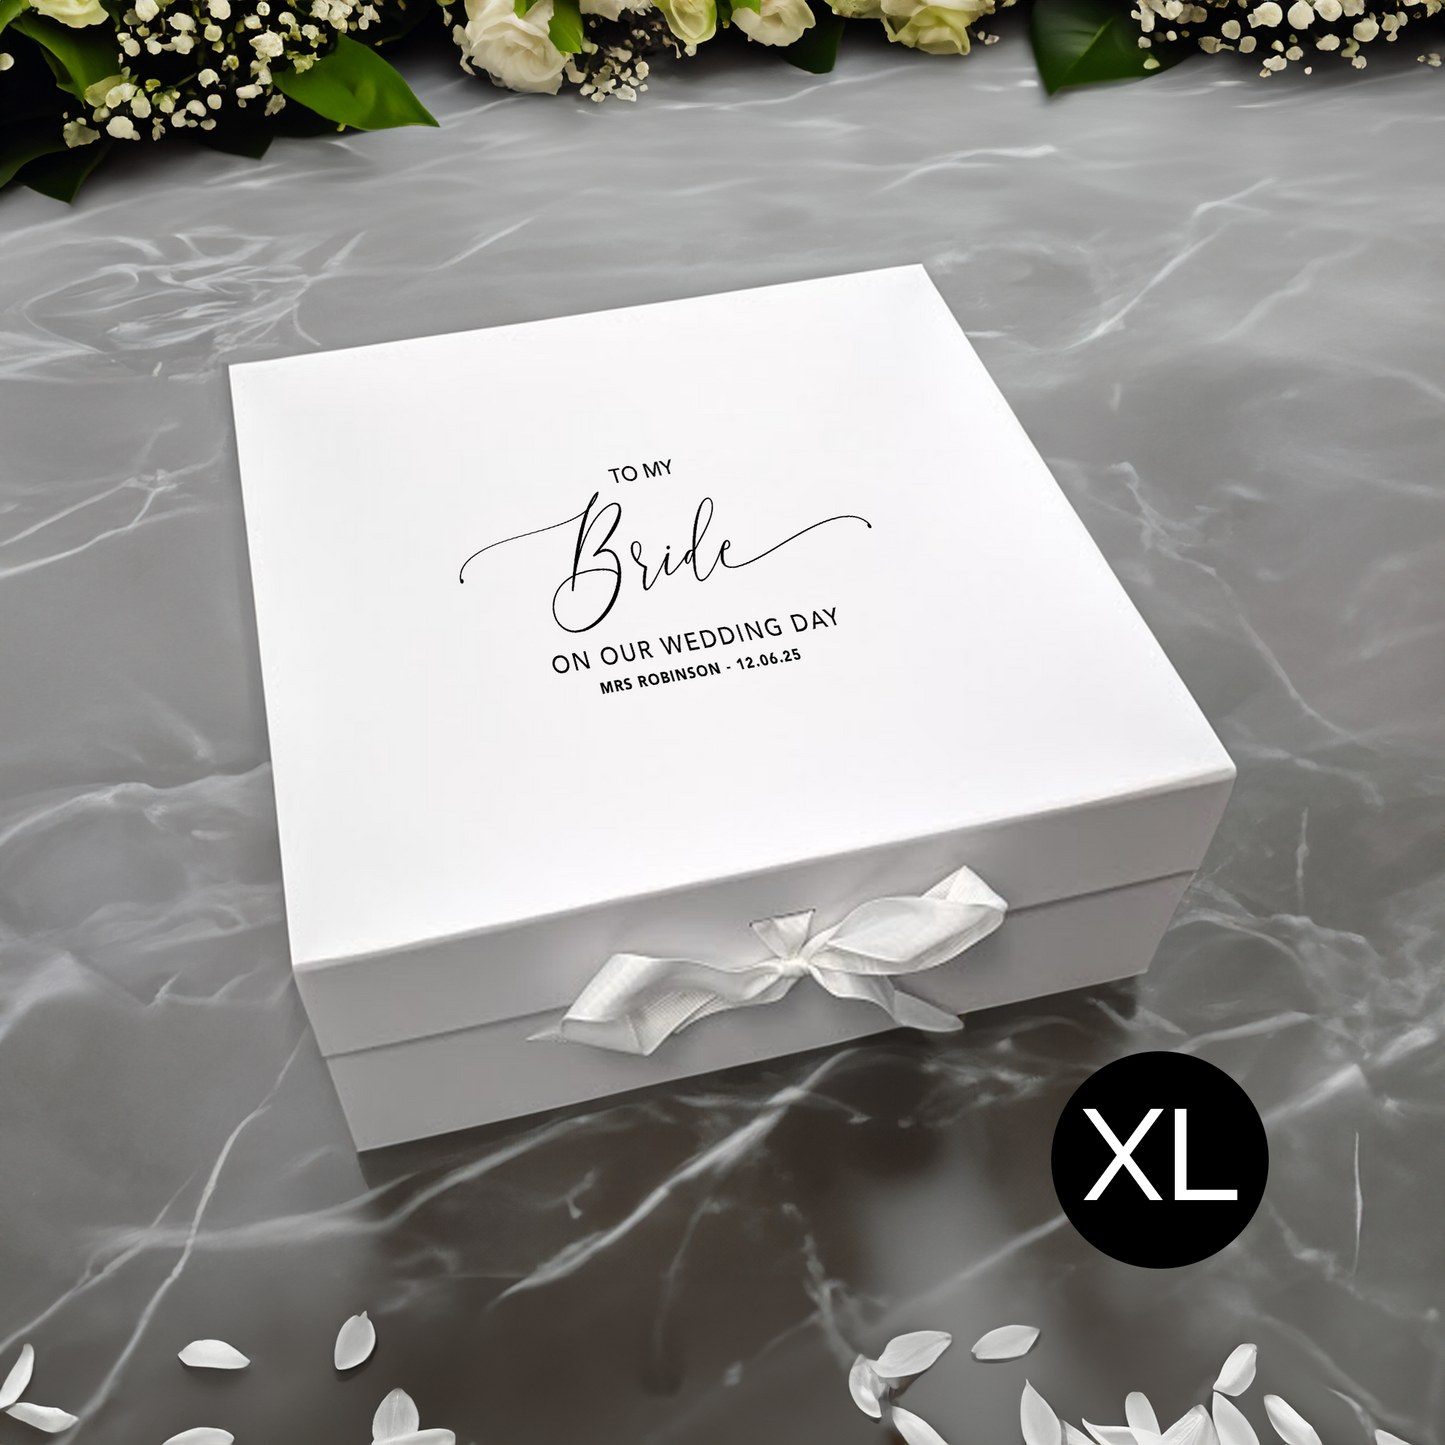 Personalised To My Bride Box - Multi Size - White, Navy & Black